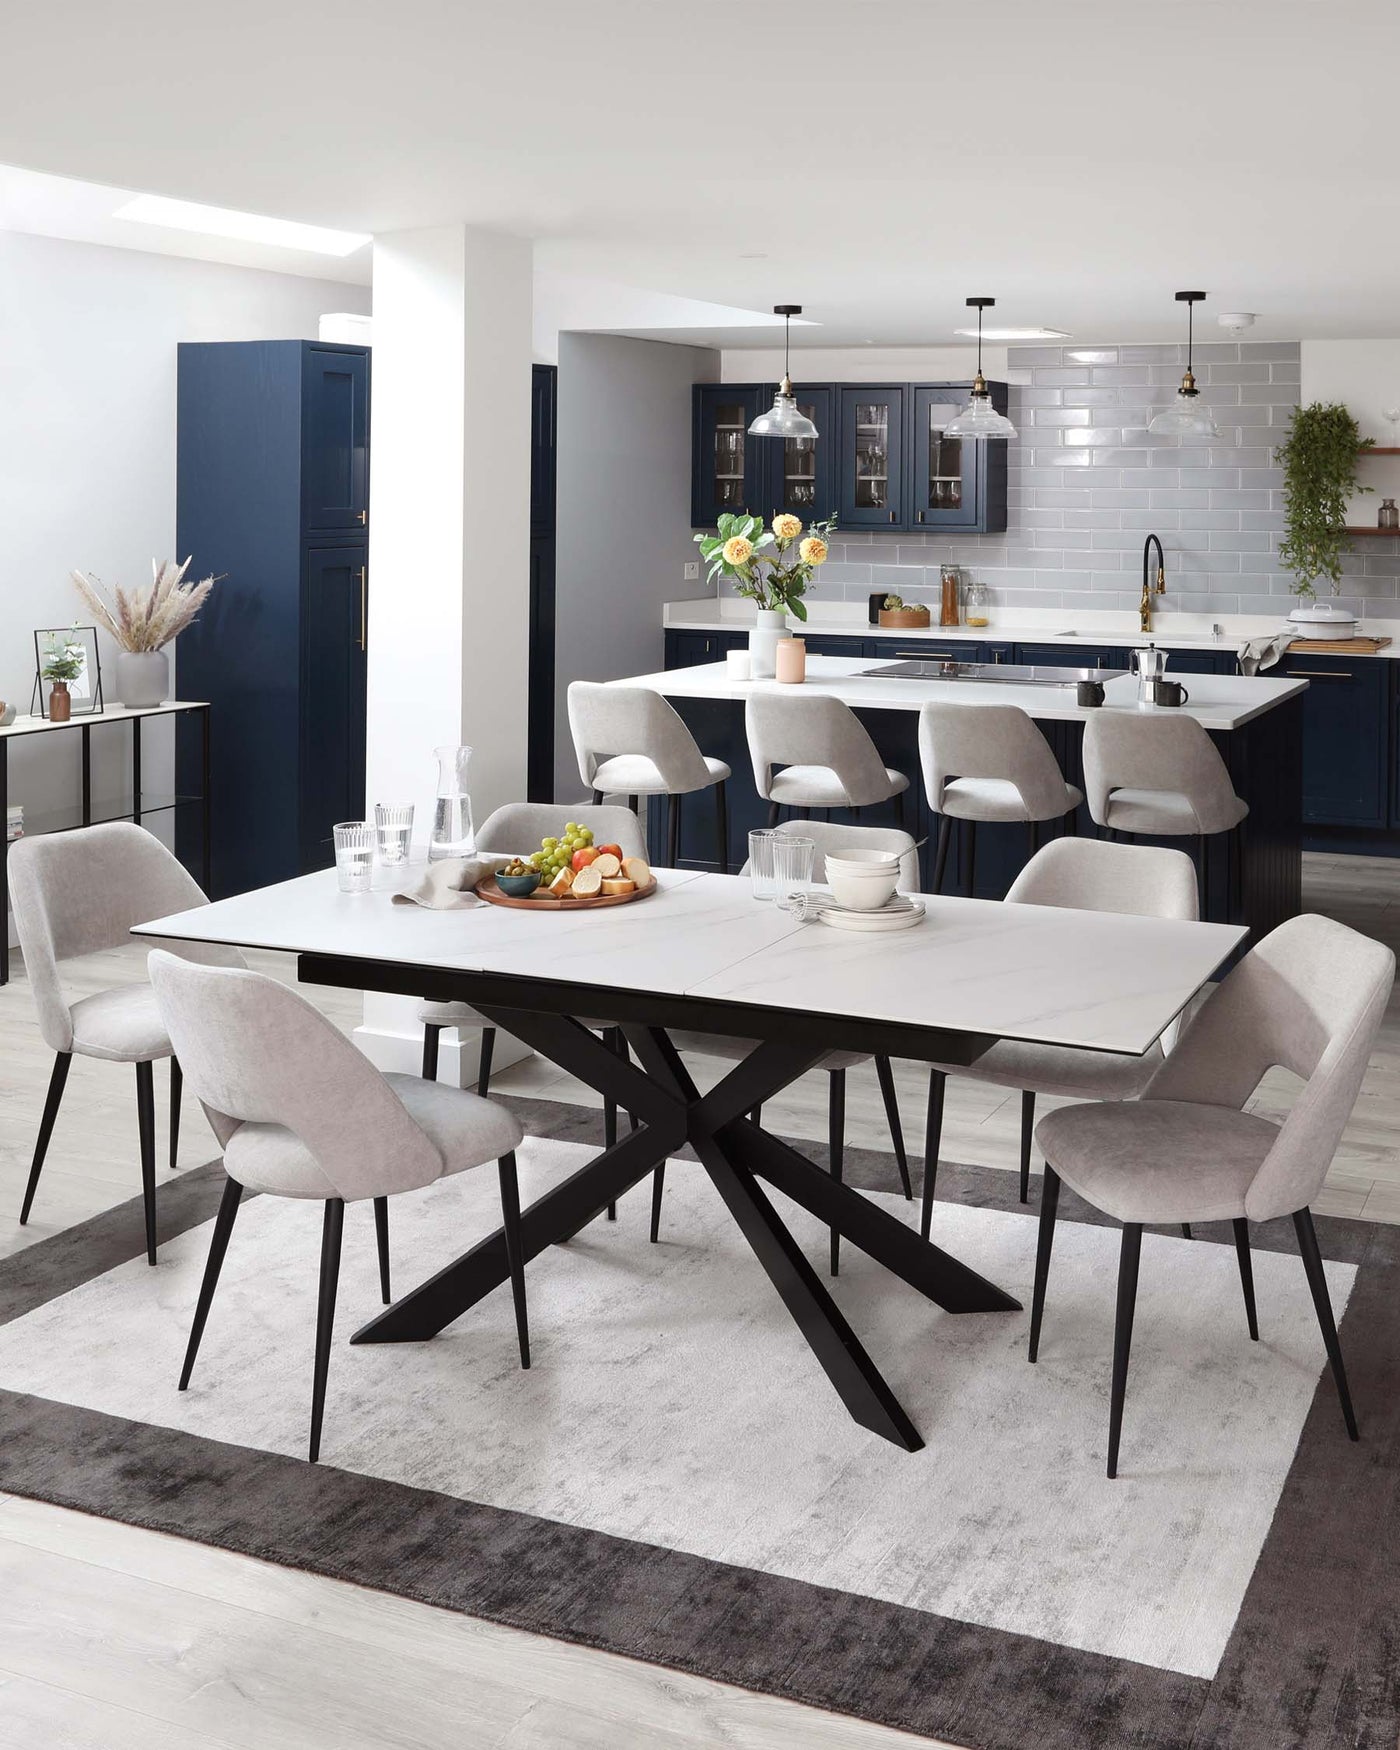 Modern dining room furniture featuring a rectangular marble-top table with an angular black metal base, surrounded by six grey upholstered chairs with black metal legs, all placed on a two-tone grey area rug. A sleek kitchen island can be seen in the background.